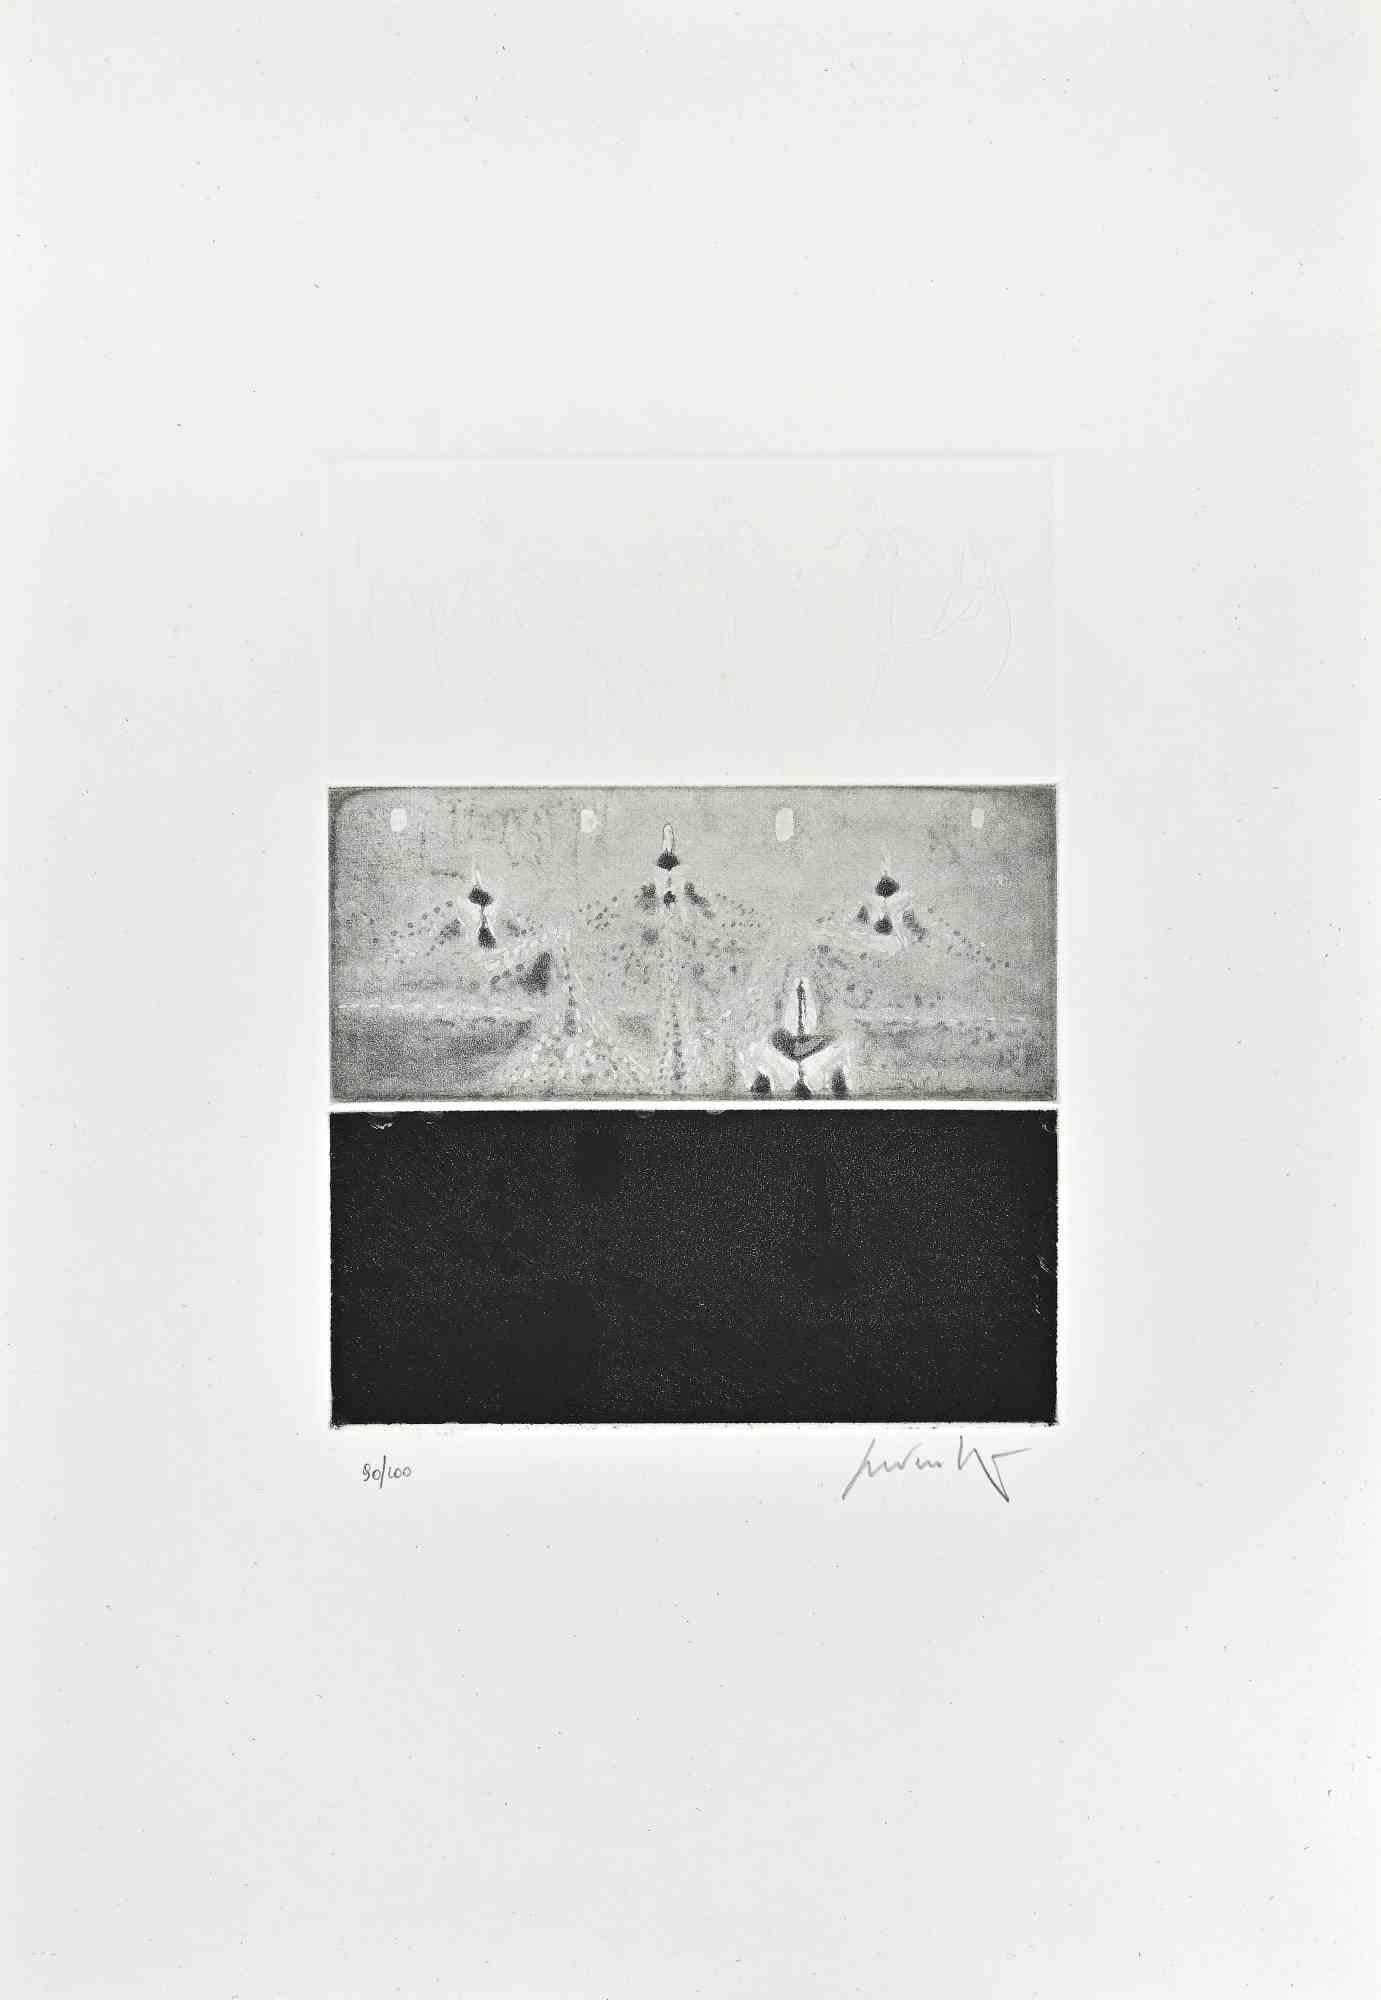 Composition  is a black and white etching on paper, realized by the Italian artist Cesare Peverelli (Milan, 1922 - Paris, 2000) and printed in 1973 by La Nuova Foglio, a publishing house of Macerata, as the dry-stamp reports on the lower right